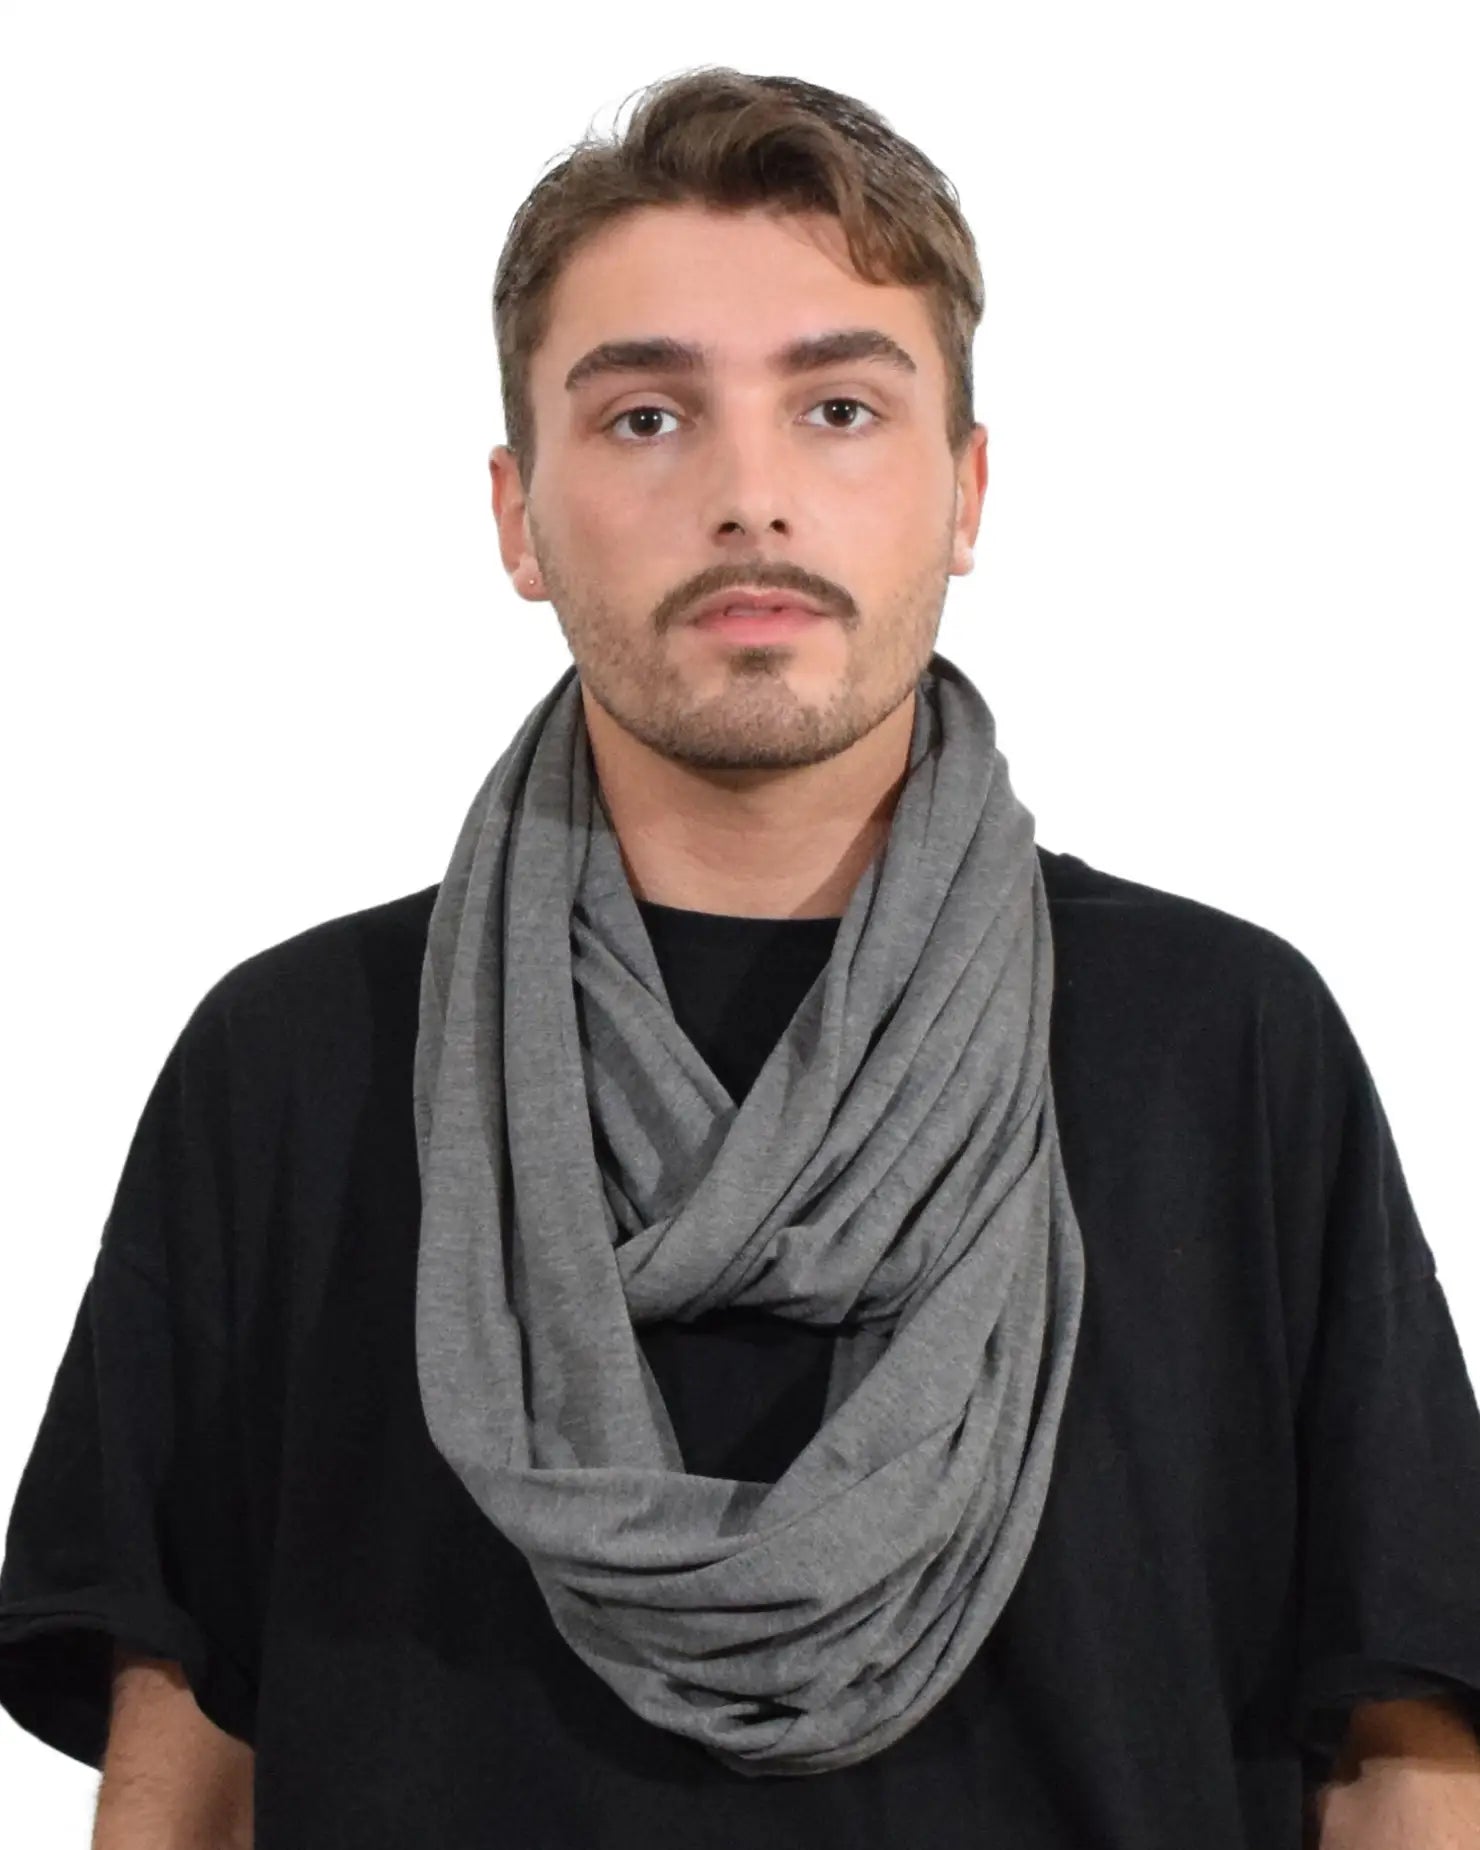 Gray scarf made from cotton blend jersey fabric worn by a man